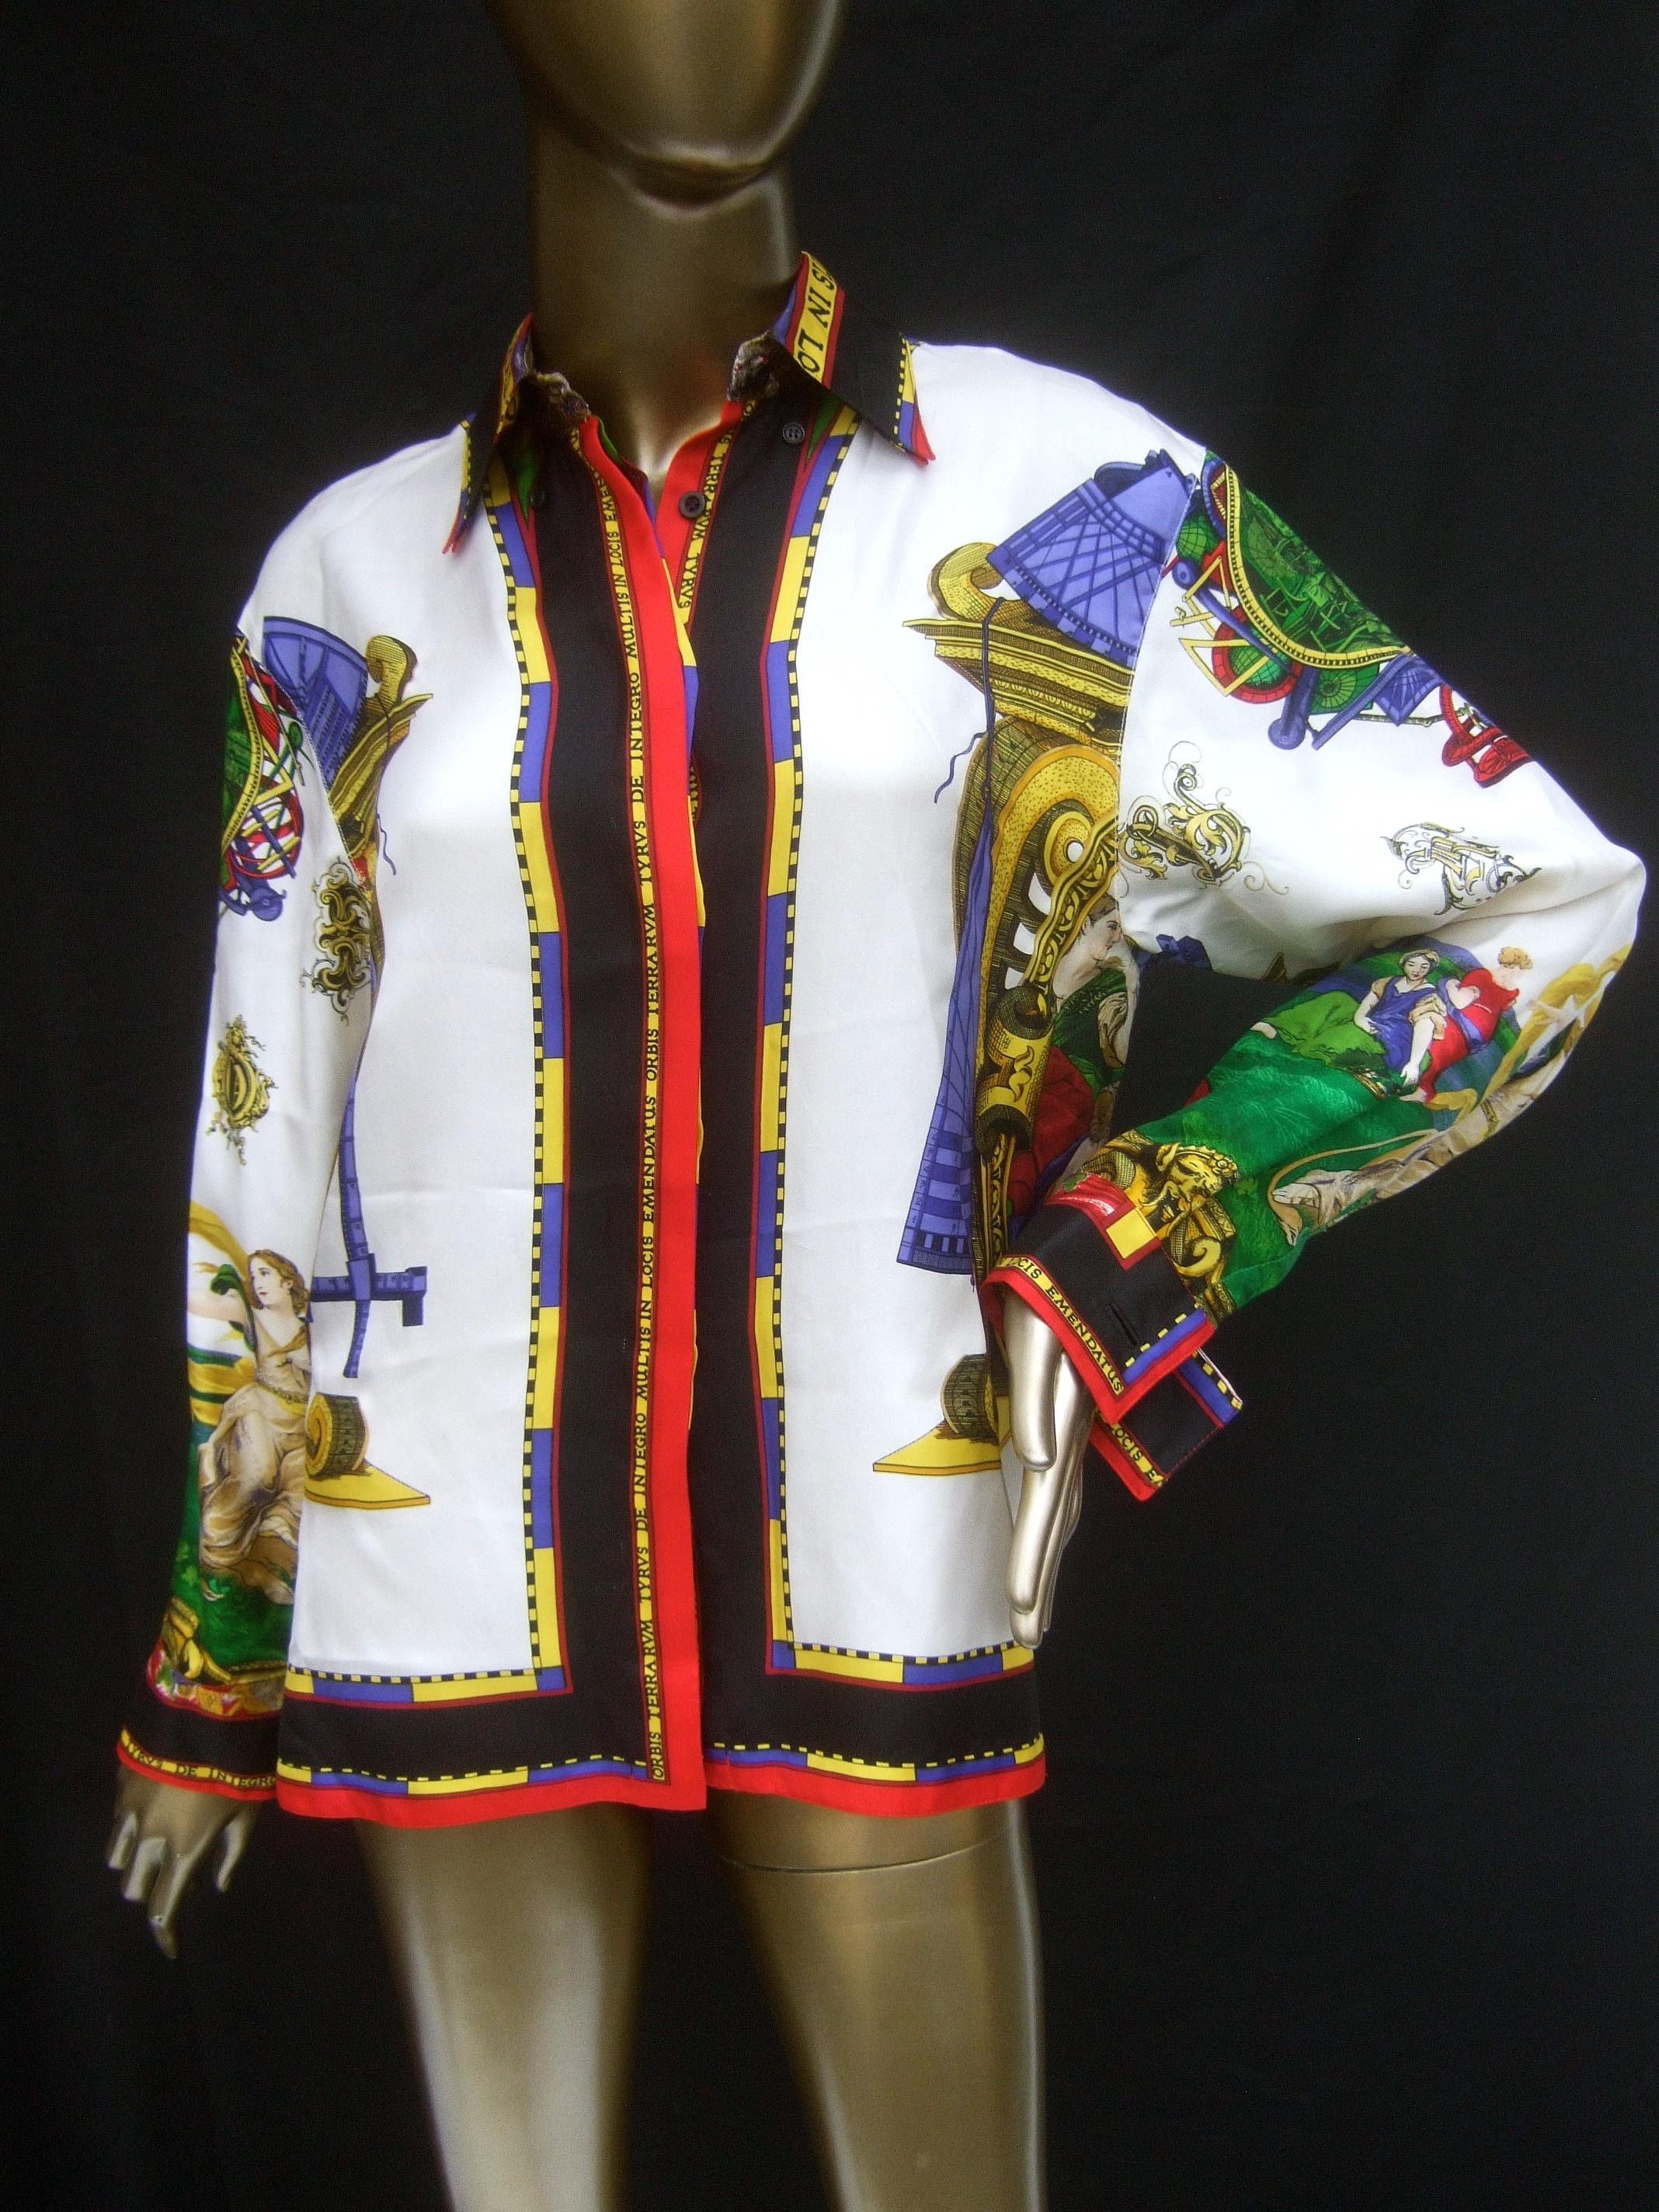 Gianni Versace Exquisite Italian graphic design silk blouse c 1990s
The stunning Italian silk blouse is illustrated with bold eye-catching
graphics of elegant renaissance style women captured in a lush
outdoor setting

The lower back section of the